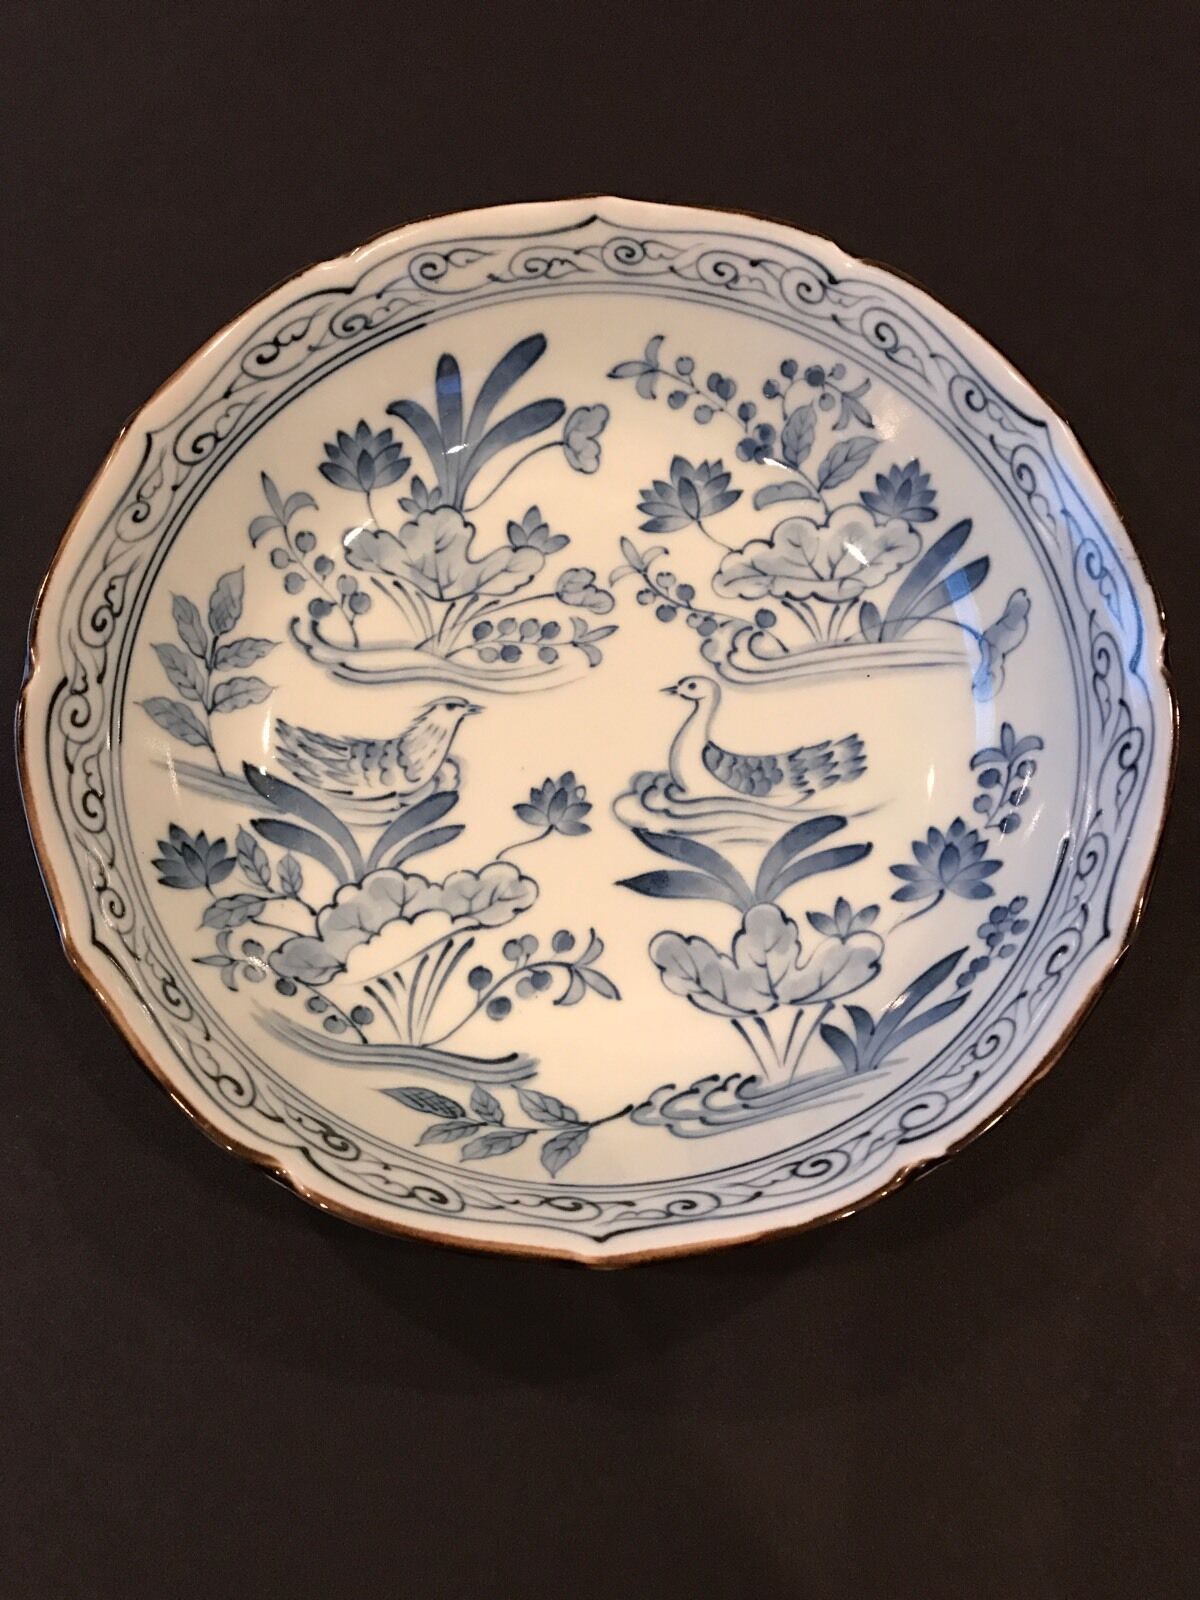 ASIAN BLUE & WHITE SCALLOPED RIM BOWL WITH BIRDS INTERIOR SIGNED